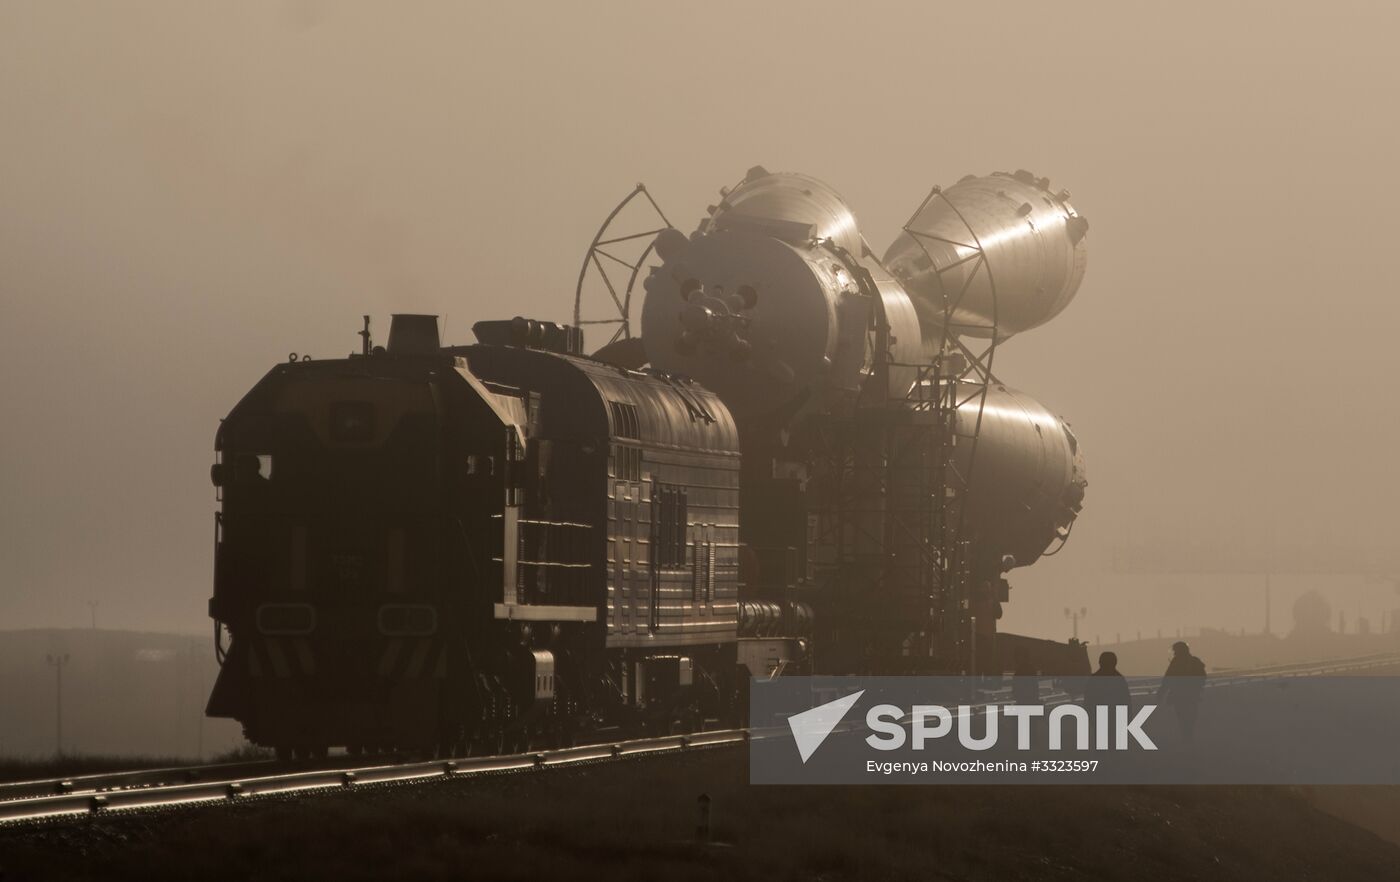 Soyuz-FG carrier rocket with Soyuz MS-08 crewed spacecraft moved to launch pad